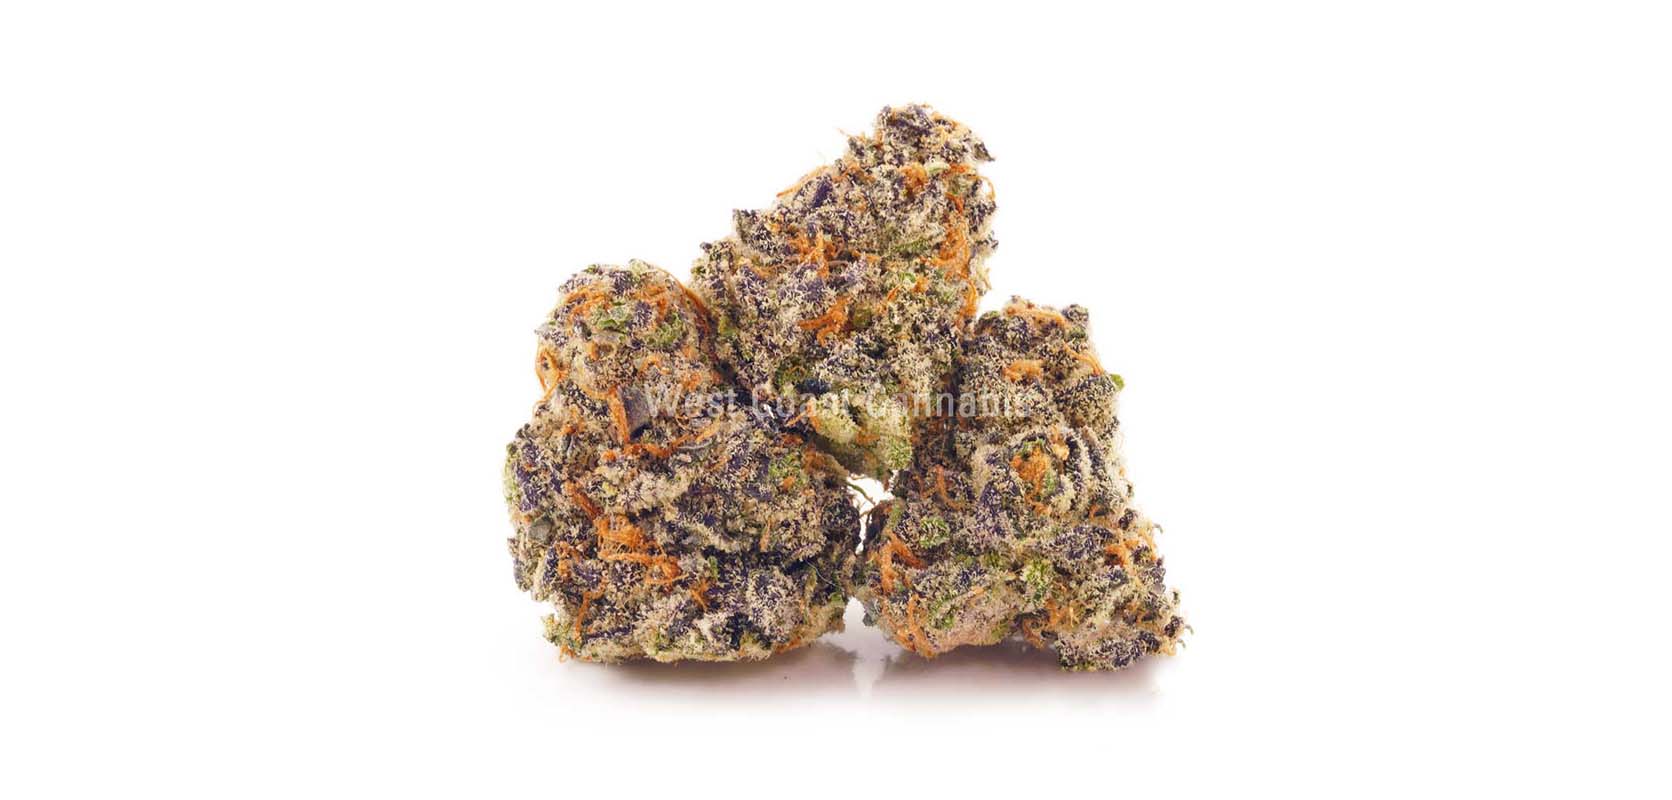 Funky Charms budget bud weed online Canada. Order weed online from an online dispensary in Canada. Value buds for weed delivery Canada.